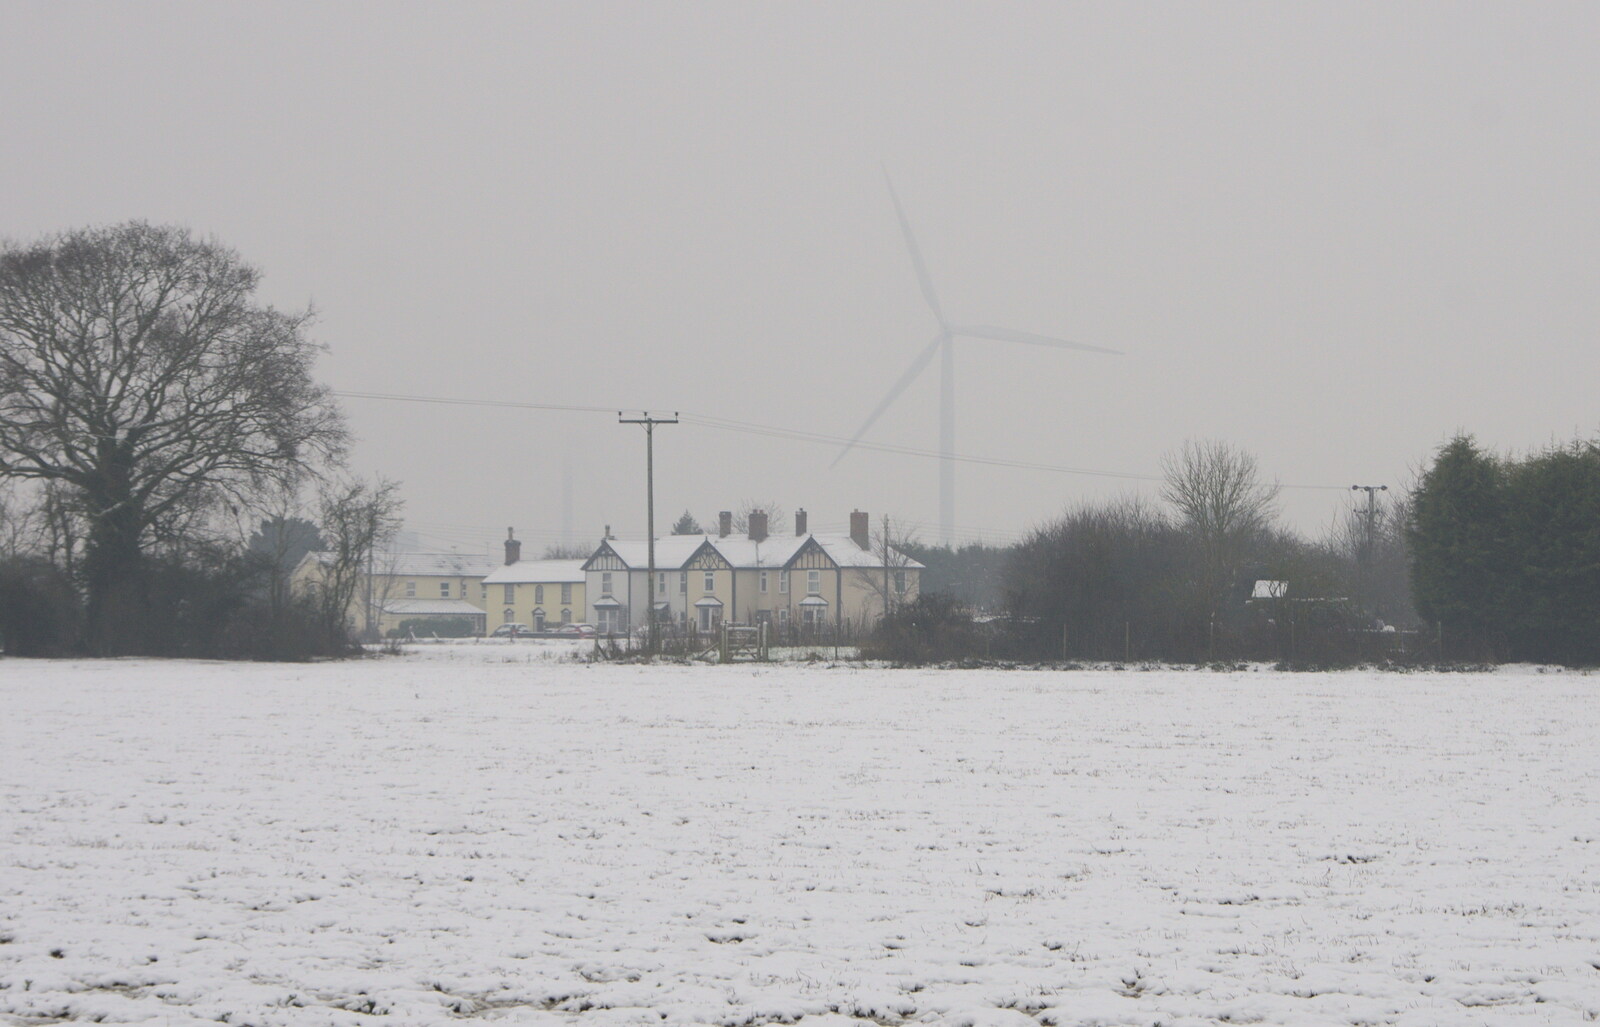 Wind turbines in the grey from A Snowy Day, Brome, Suffolk - 12th February 2017